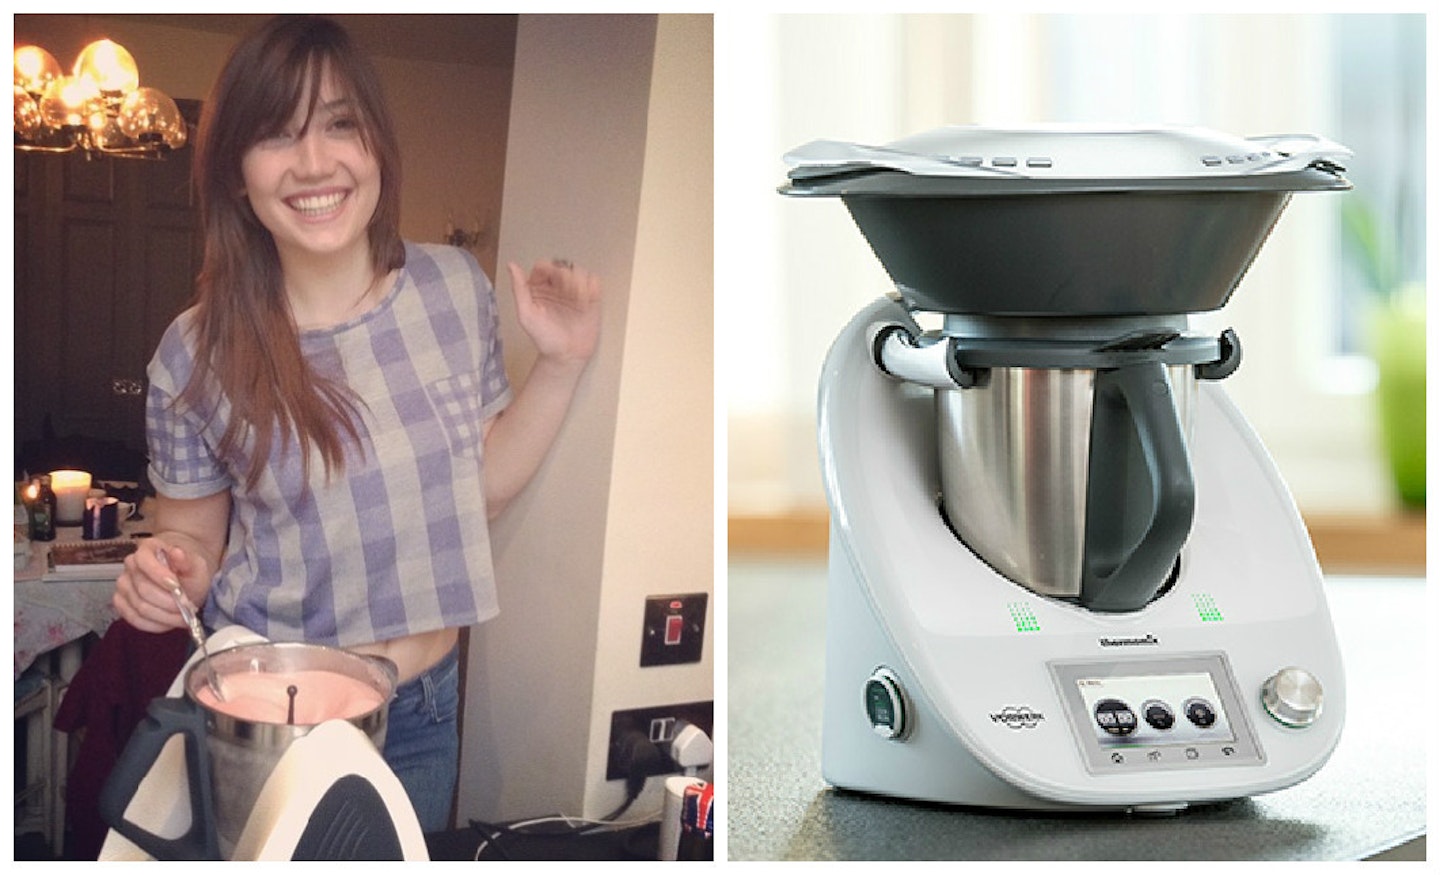 Daisy Lowe and her Thermomix on Instagram